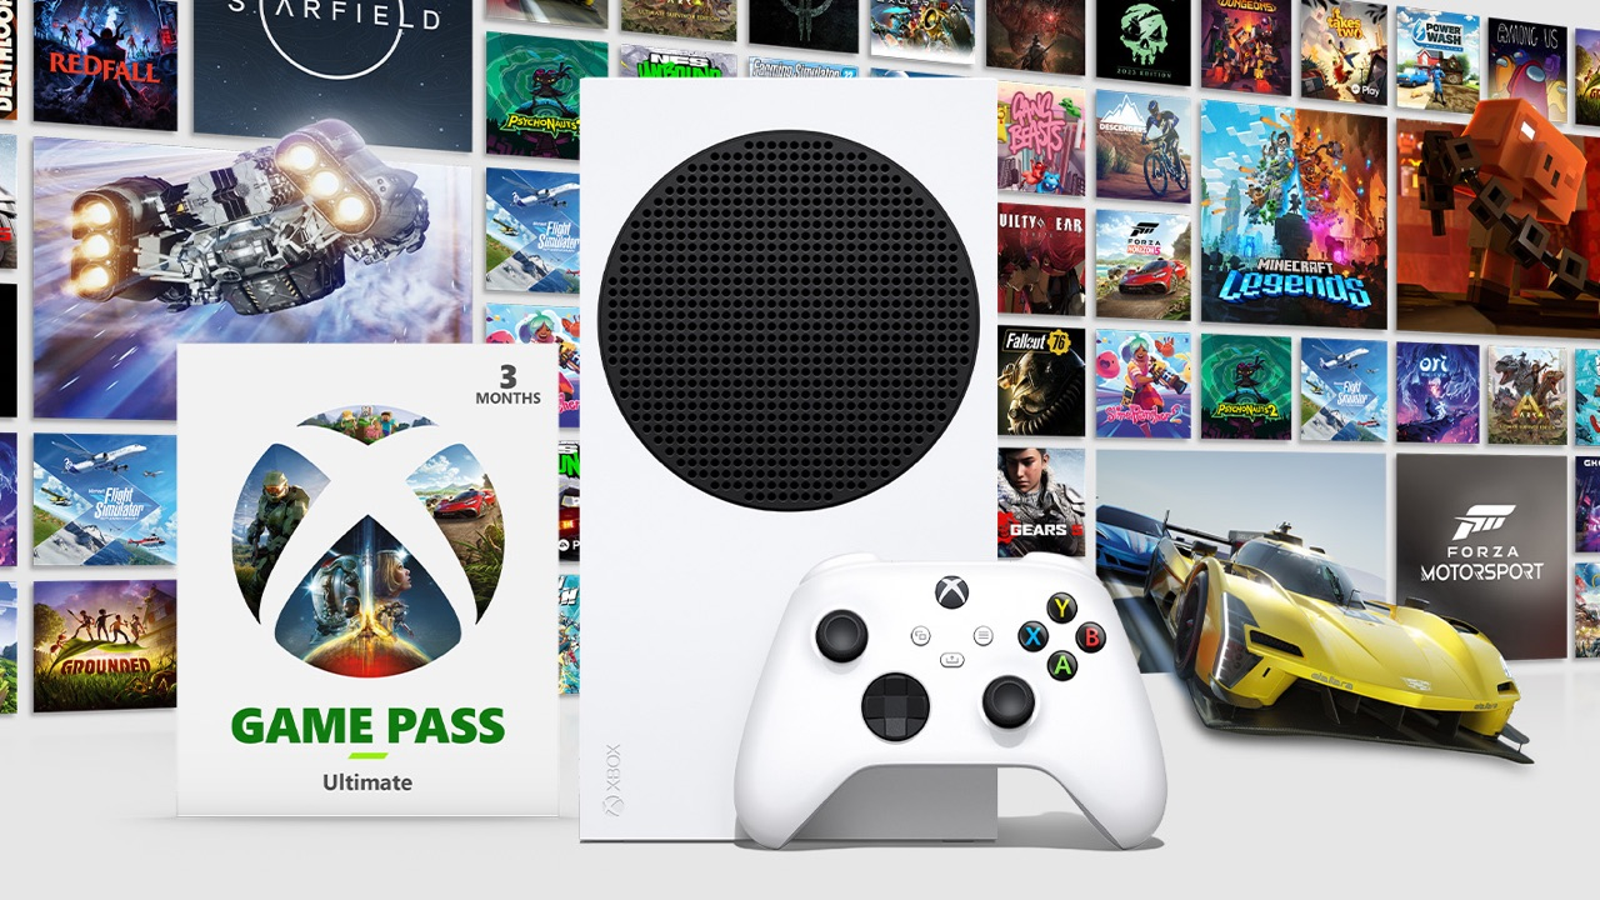 Consola Xbox Series S Starter 512Gb + Game Pass